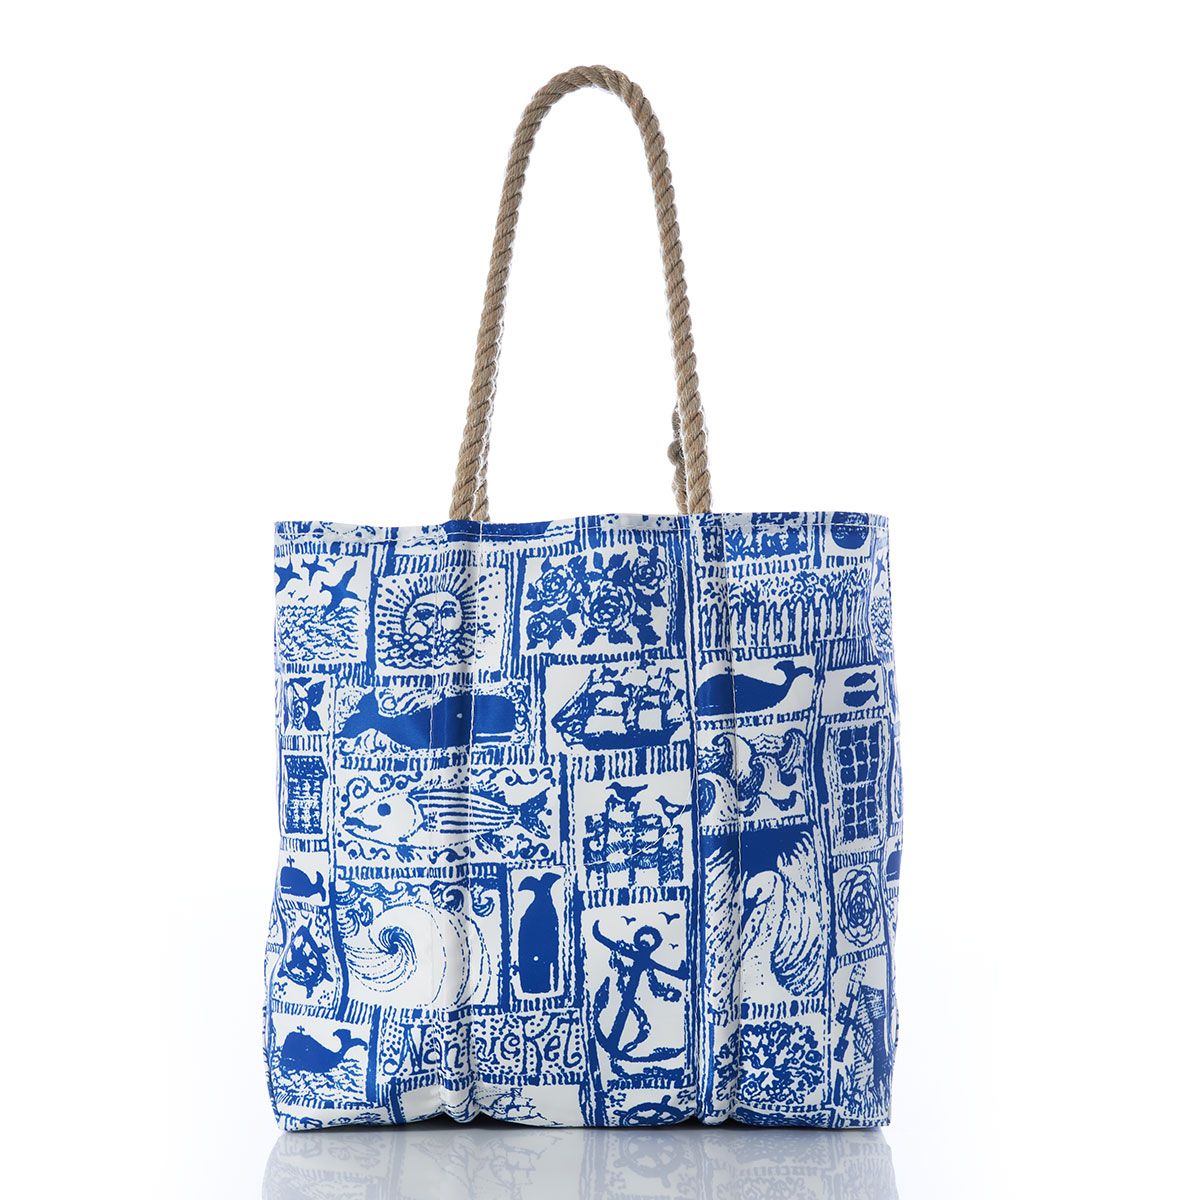 back view of blue squares filled with various nautical imagery printed on recycled sail cloth medium tote with hemp rope handles